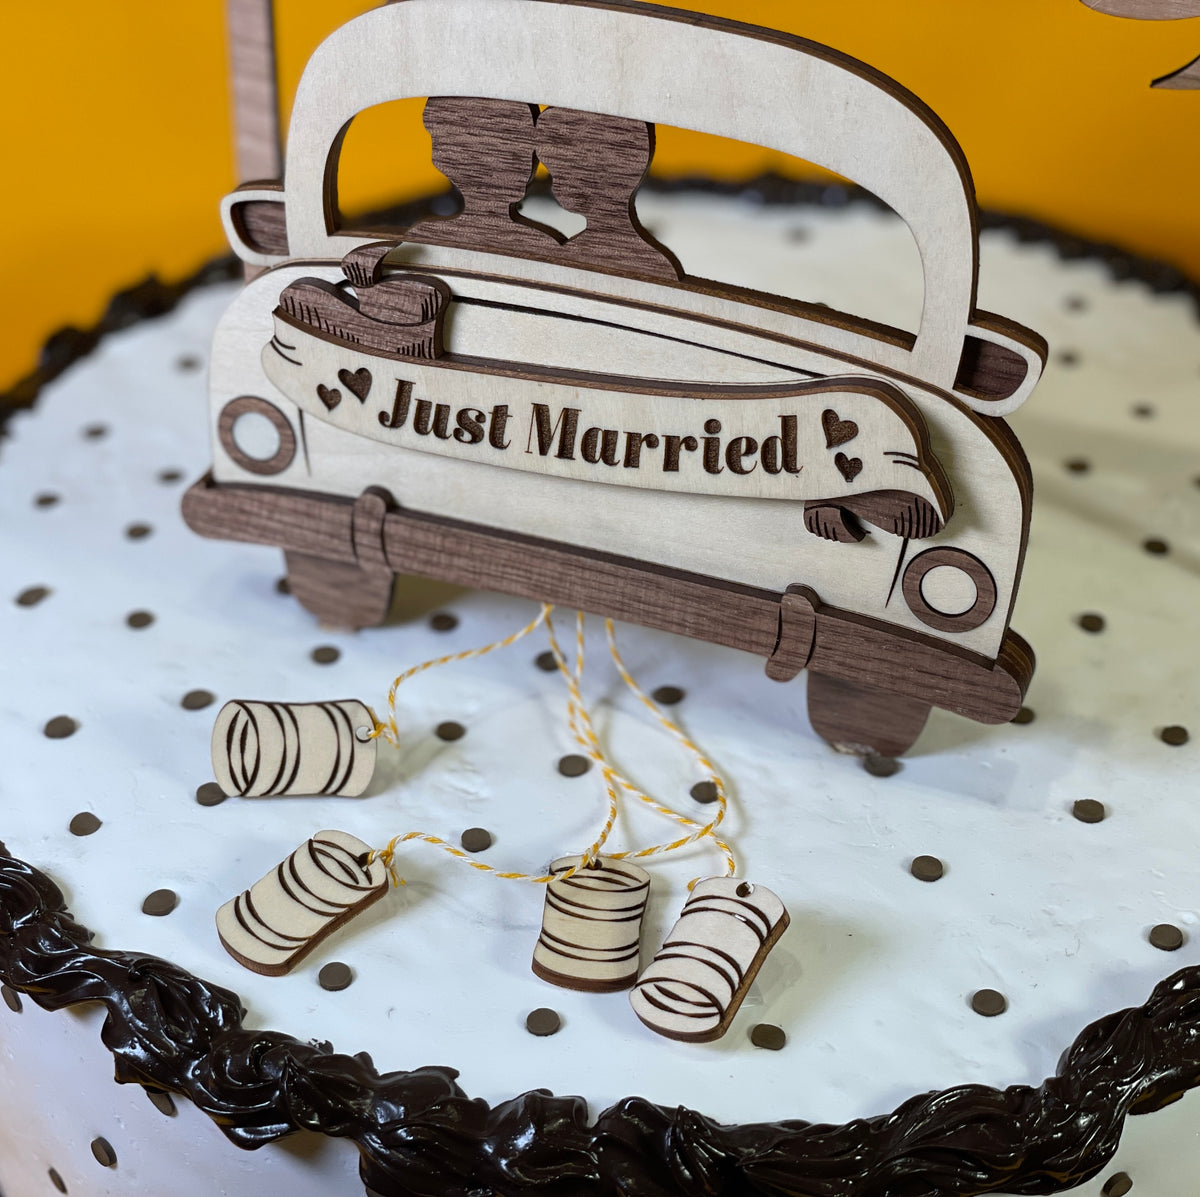 Just Married' Wooden Cake Topper - To Have & to Hold